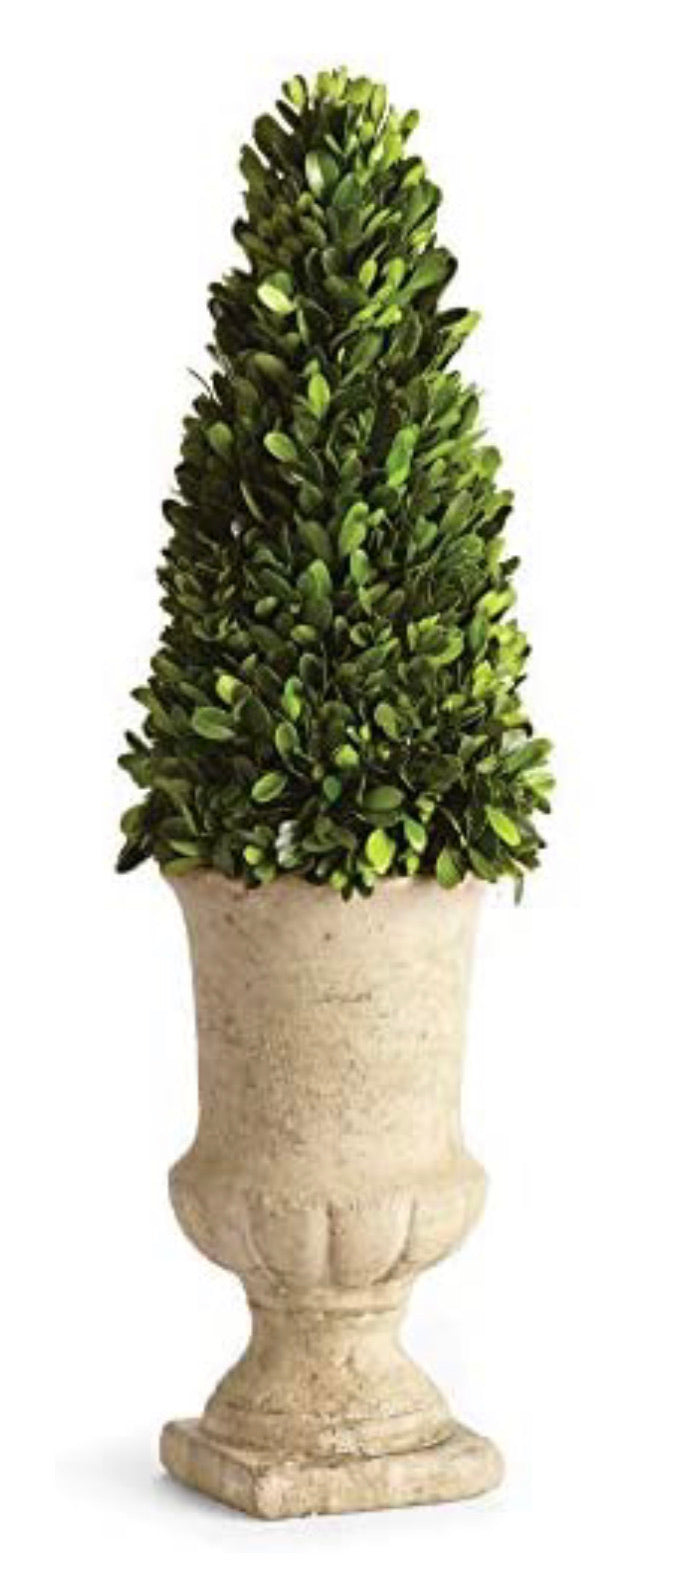 Napa Home and Garden Preserved Greens Topiary in Urn